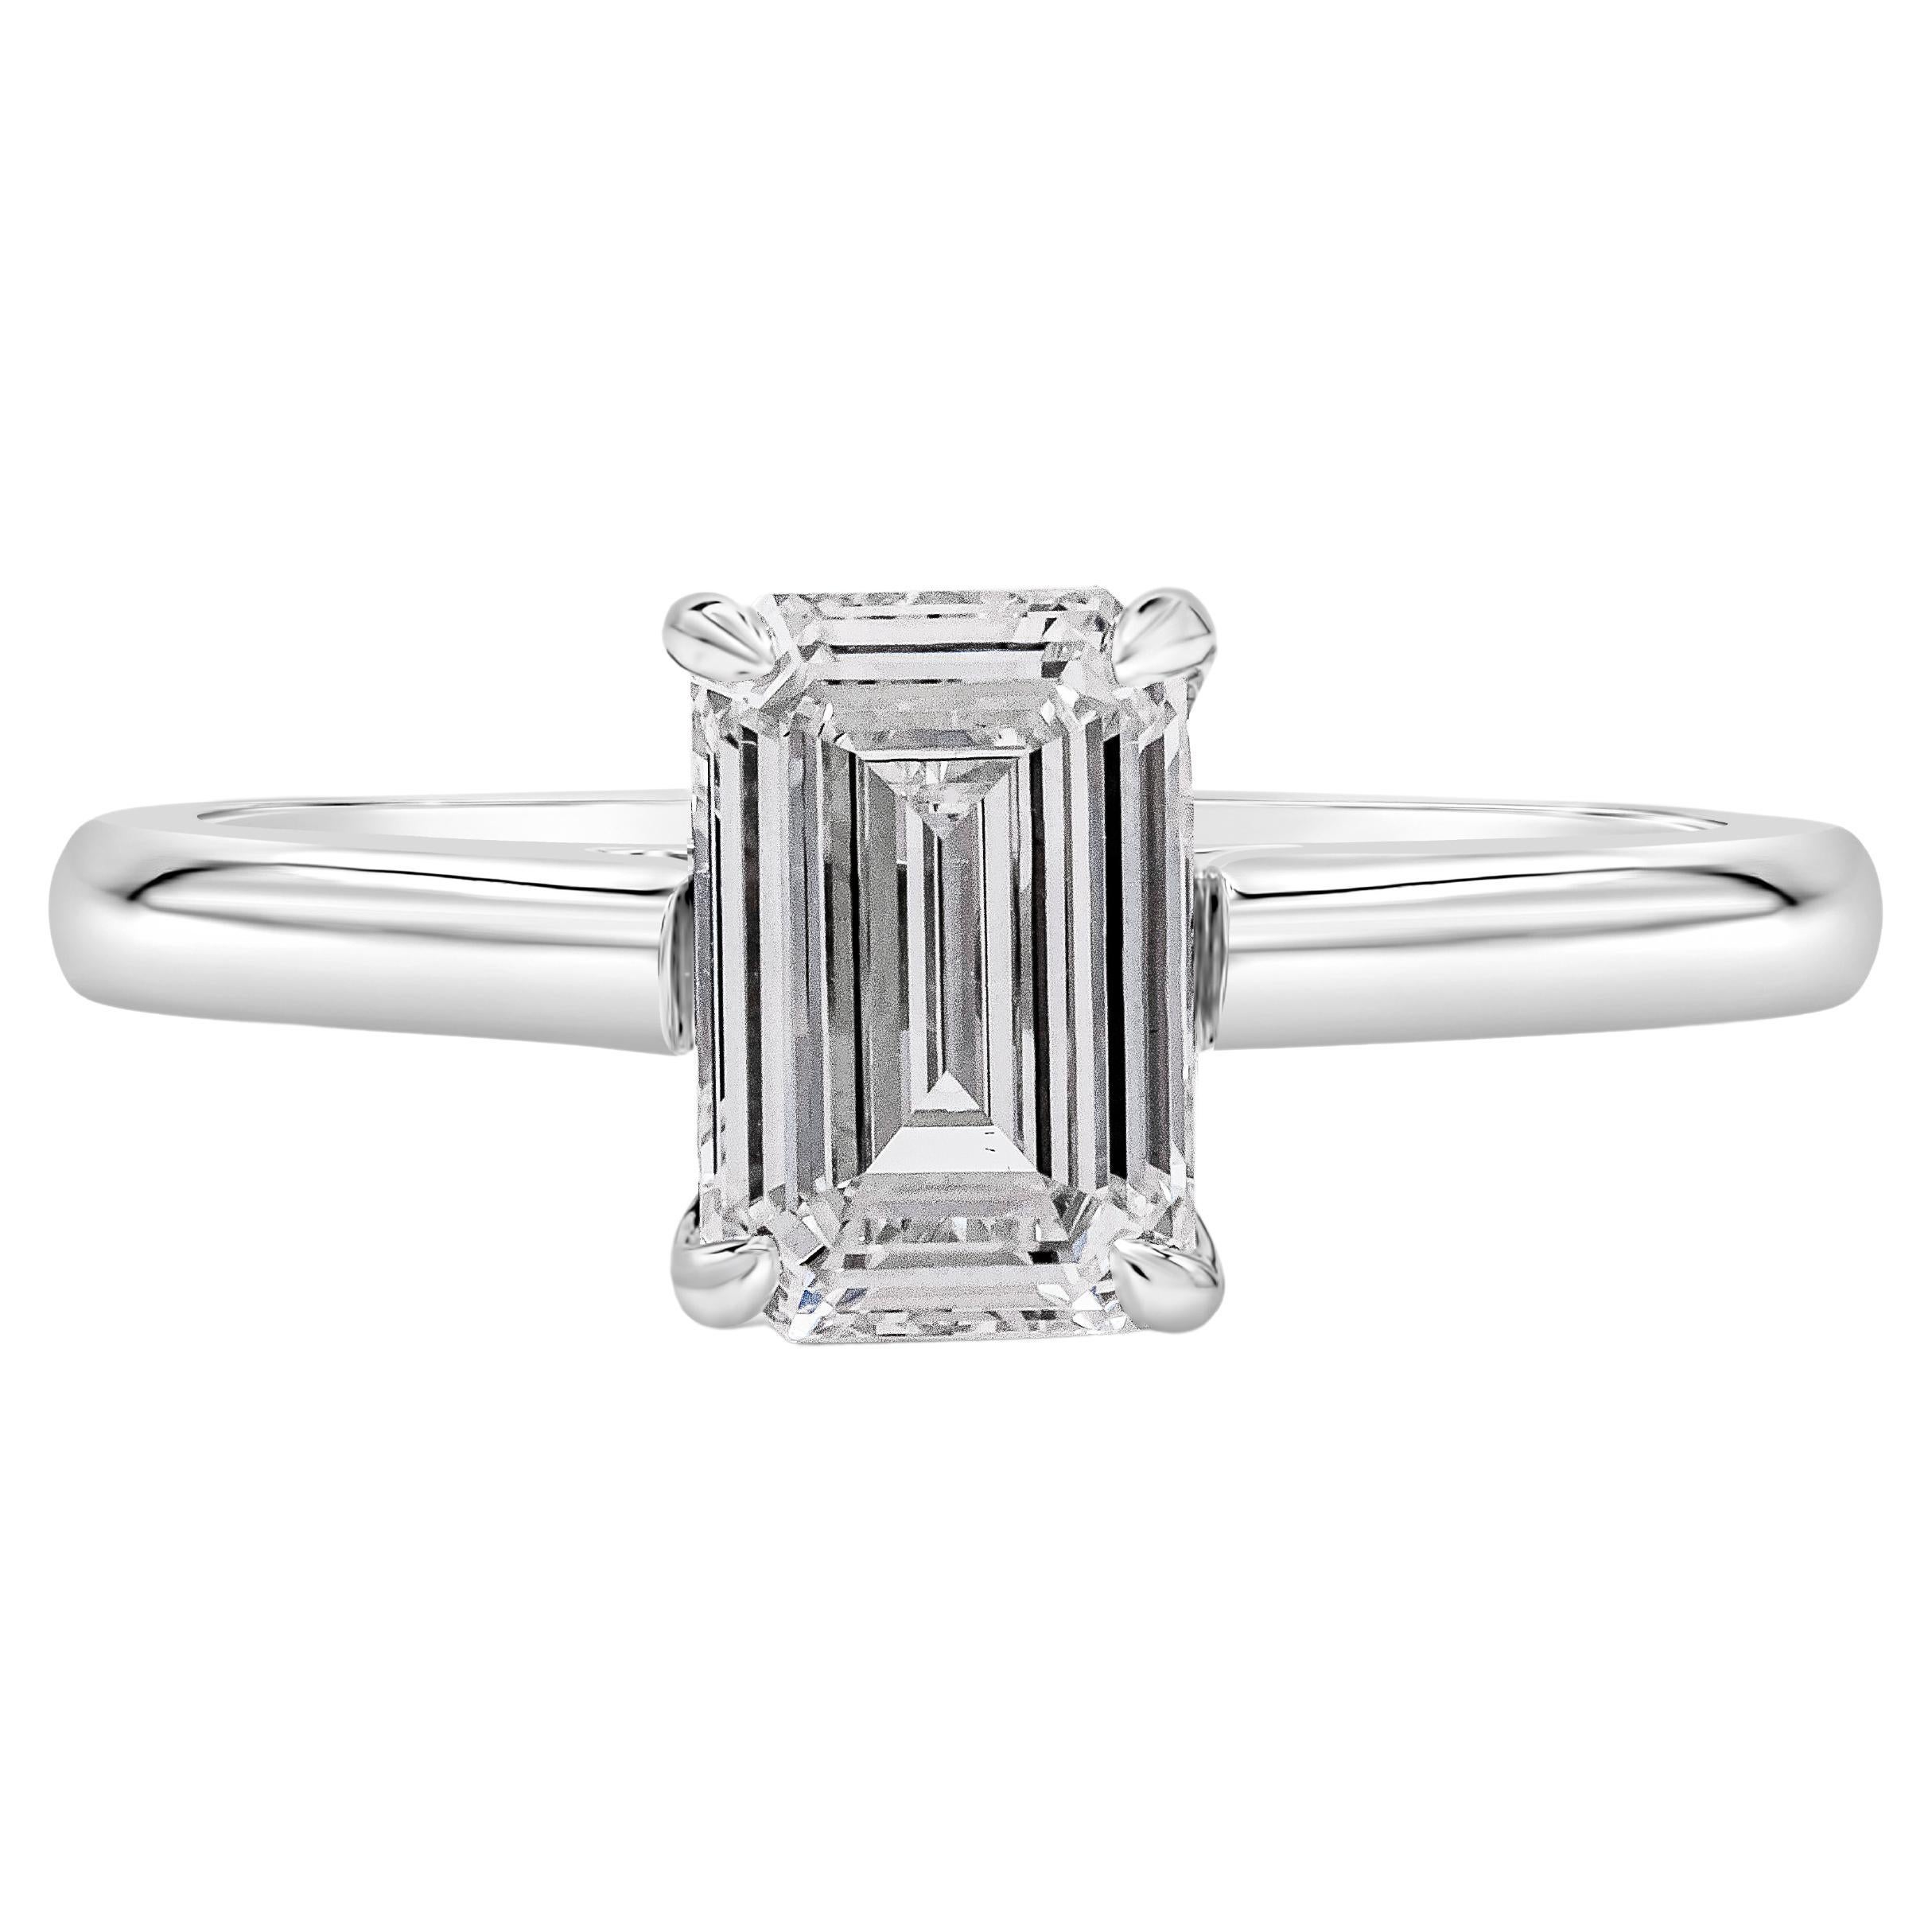 GIA Certified 1.27 Carat Emerald Cut Diamond Solitaire Engagement Ring